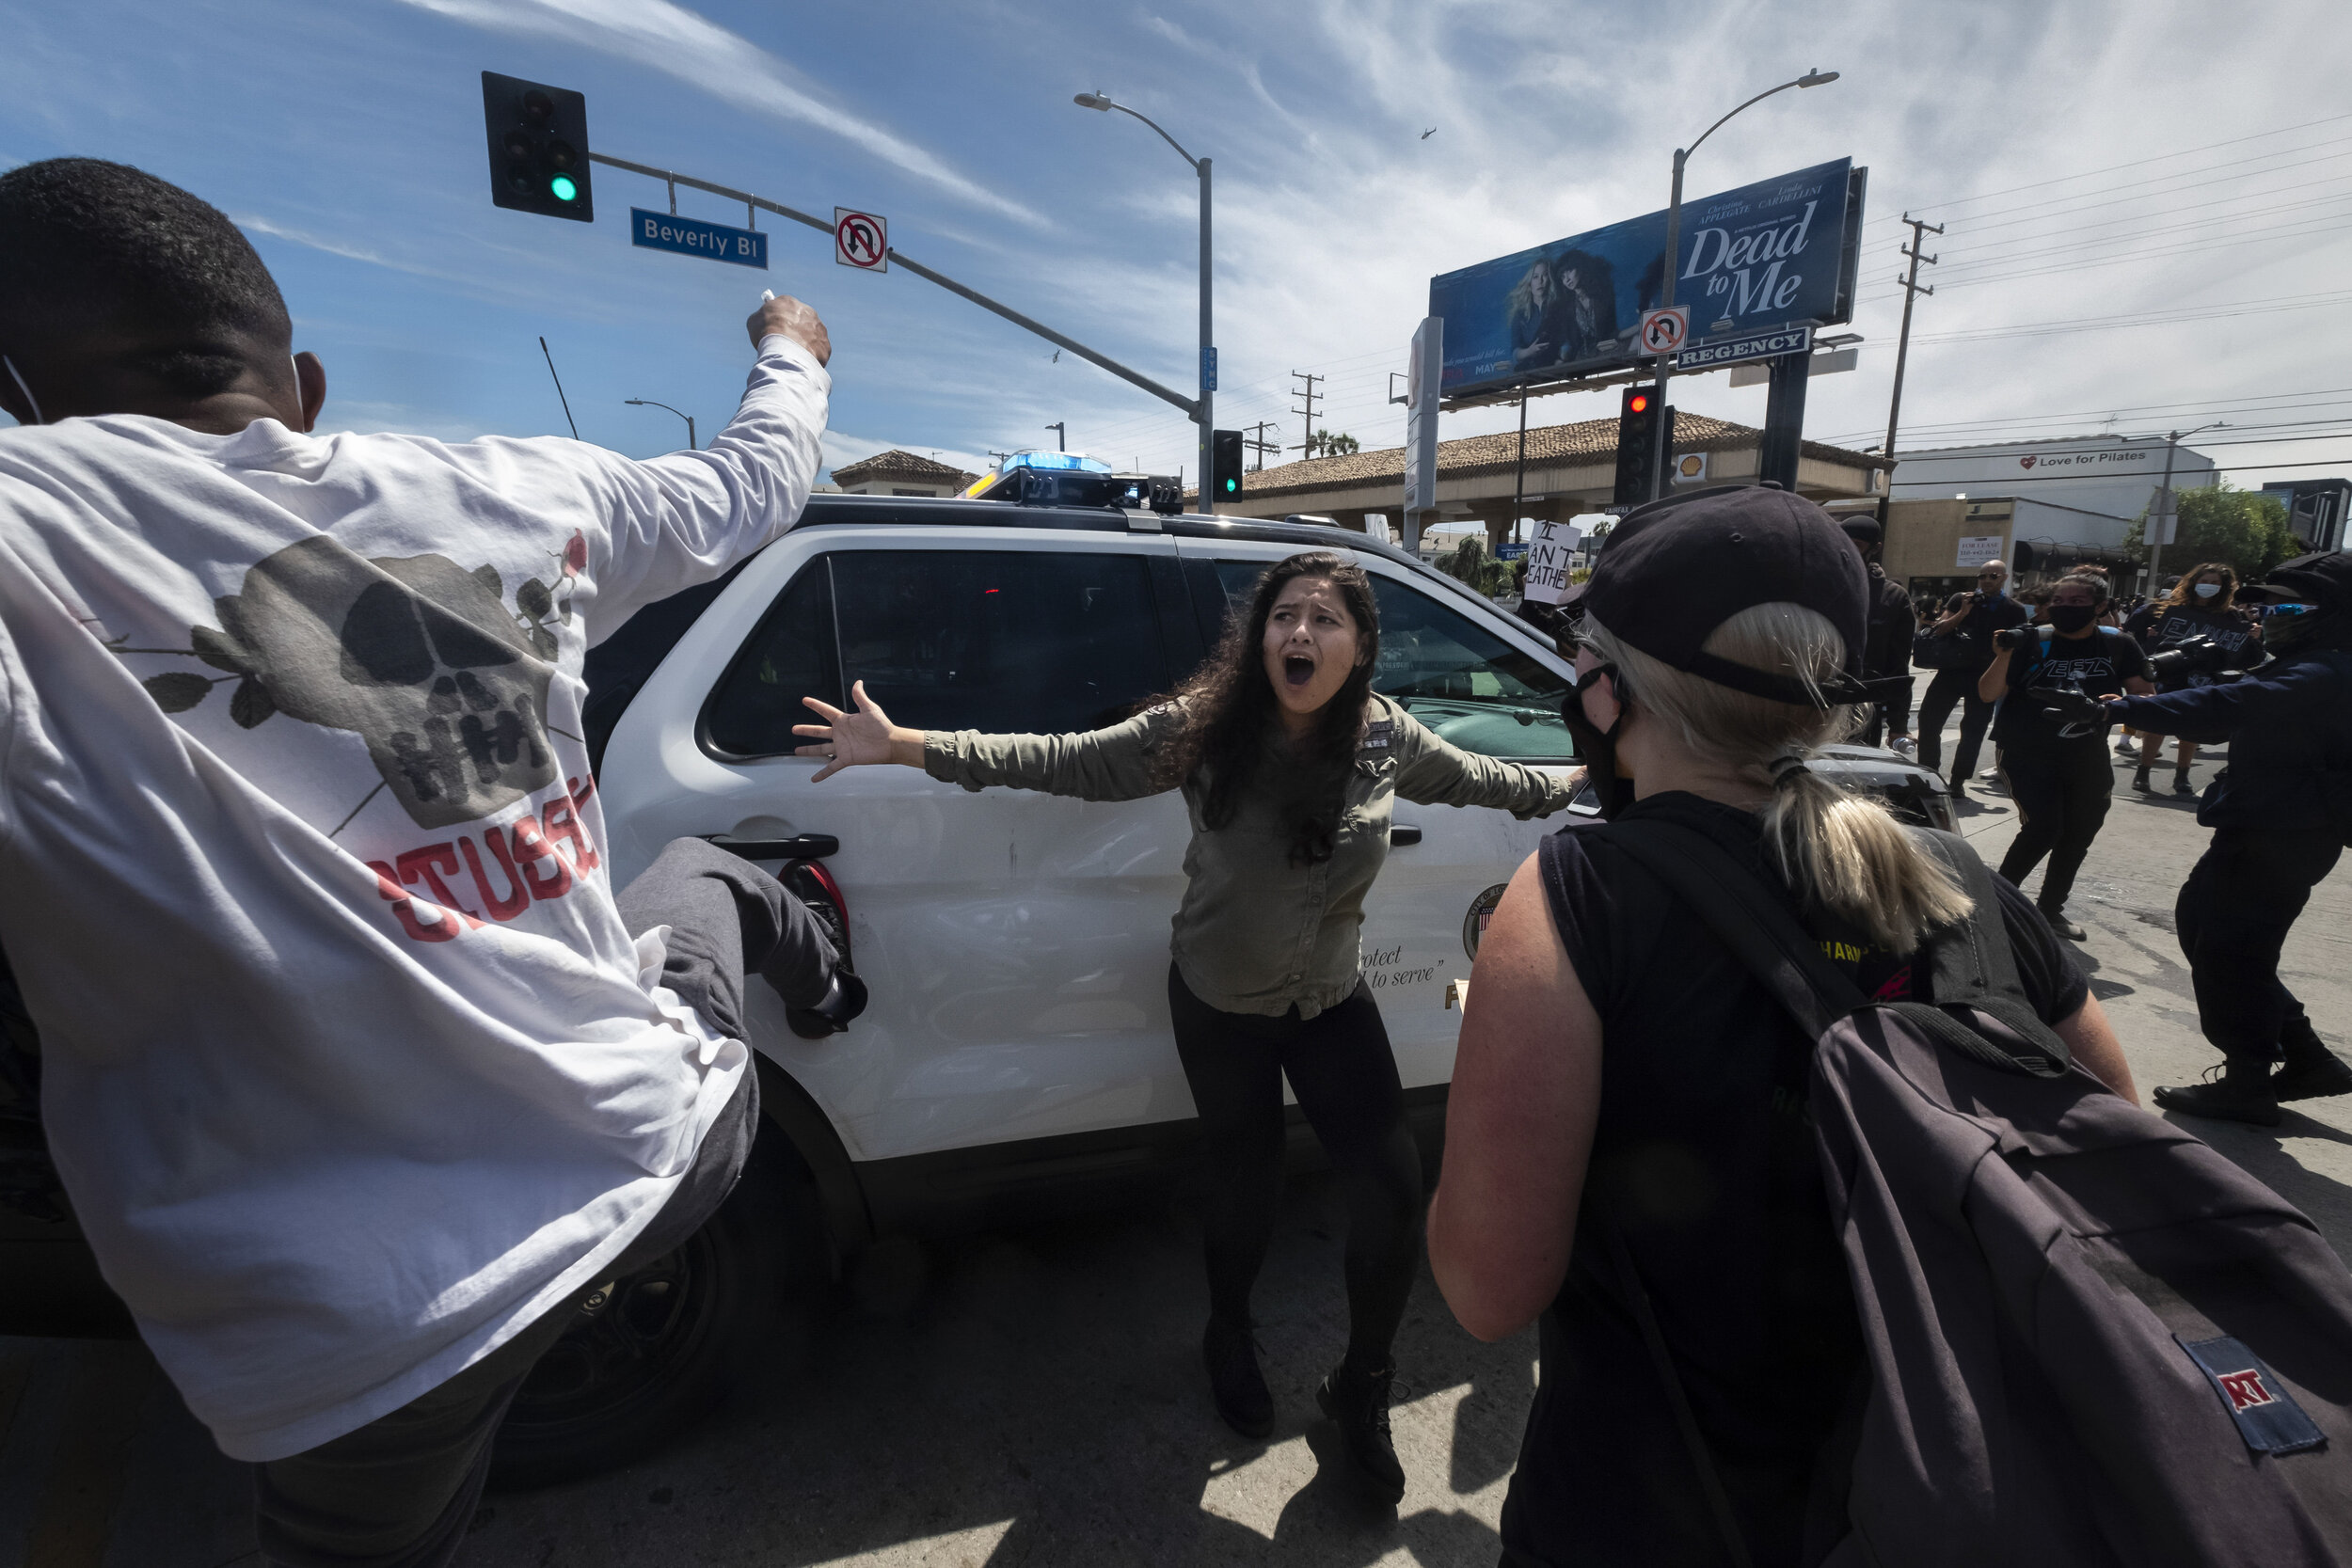  A protester, center, tries to stop others from attacking a police vehicle during a protest over the death of George Floyd in Los Angeles, May 30, 2020.  (AP Photo/Ringo H.W. Chiu) 